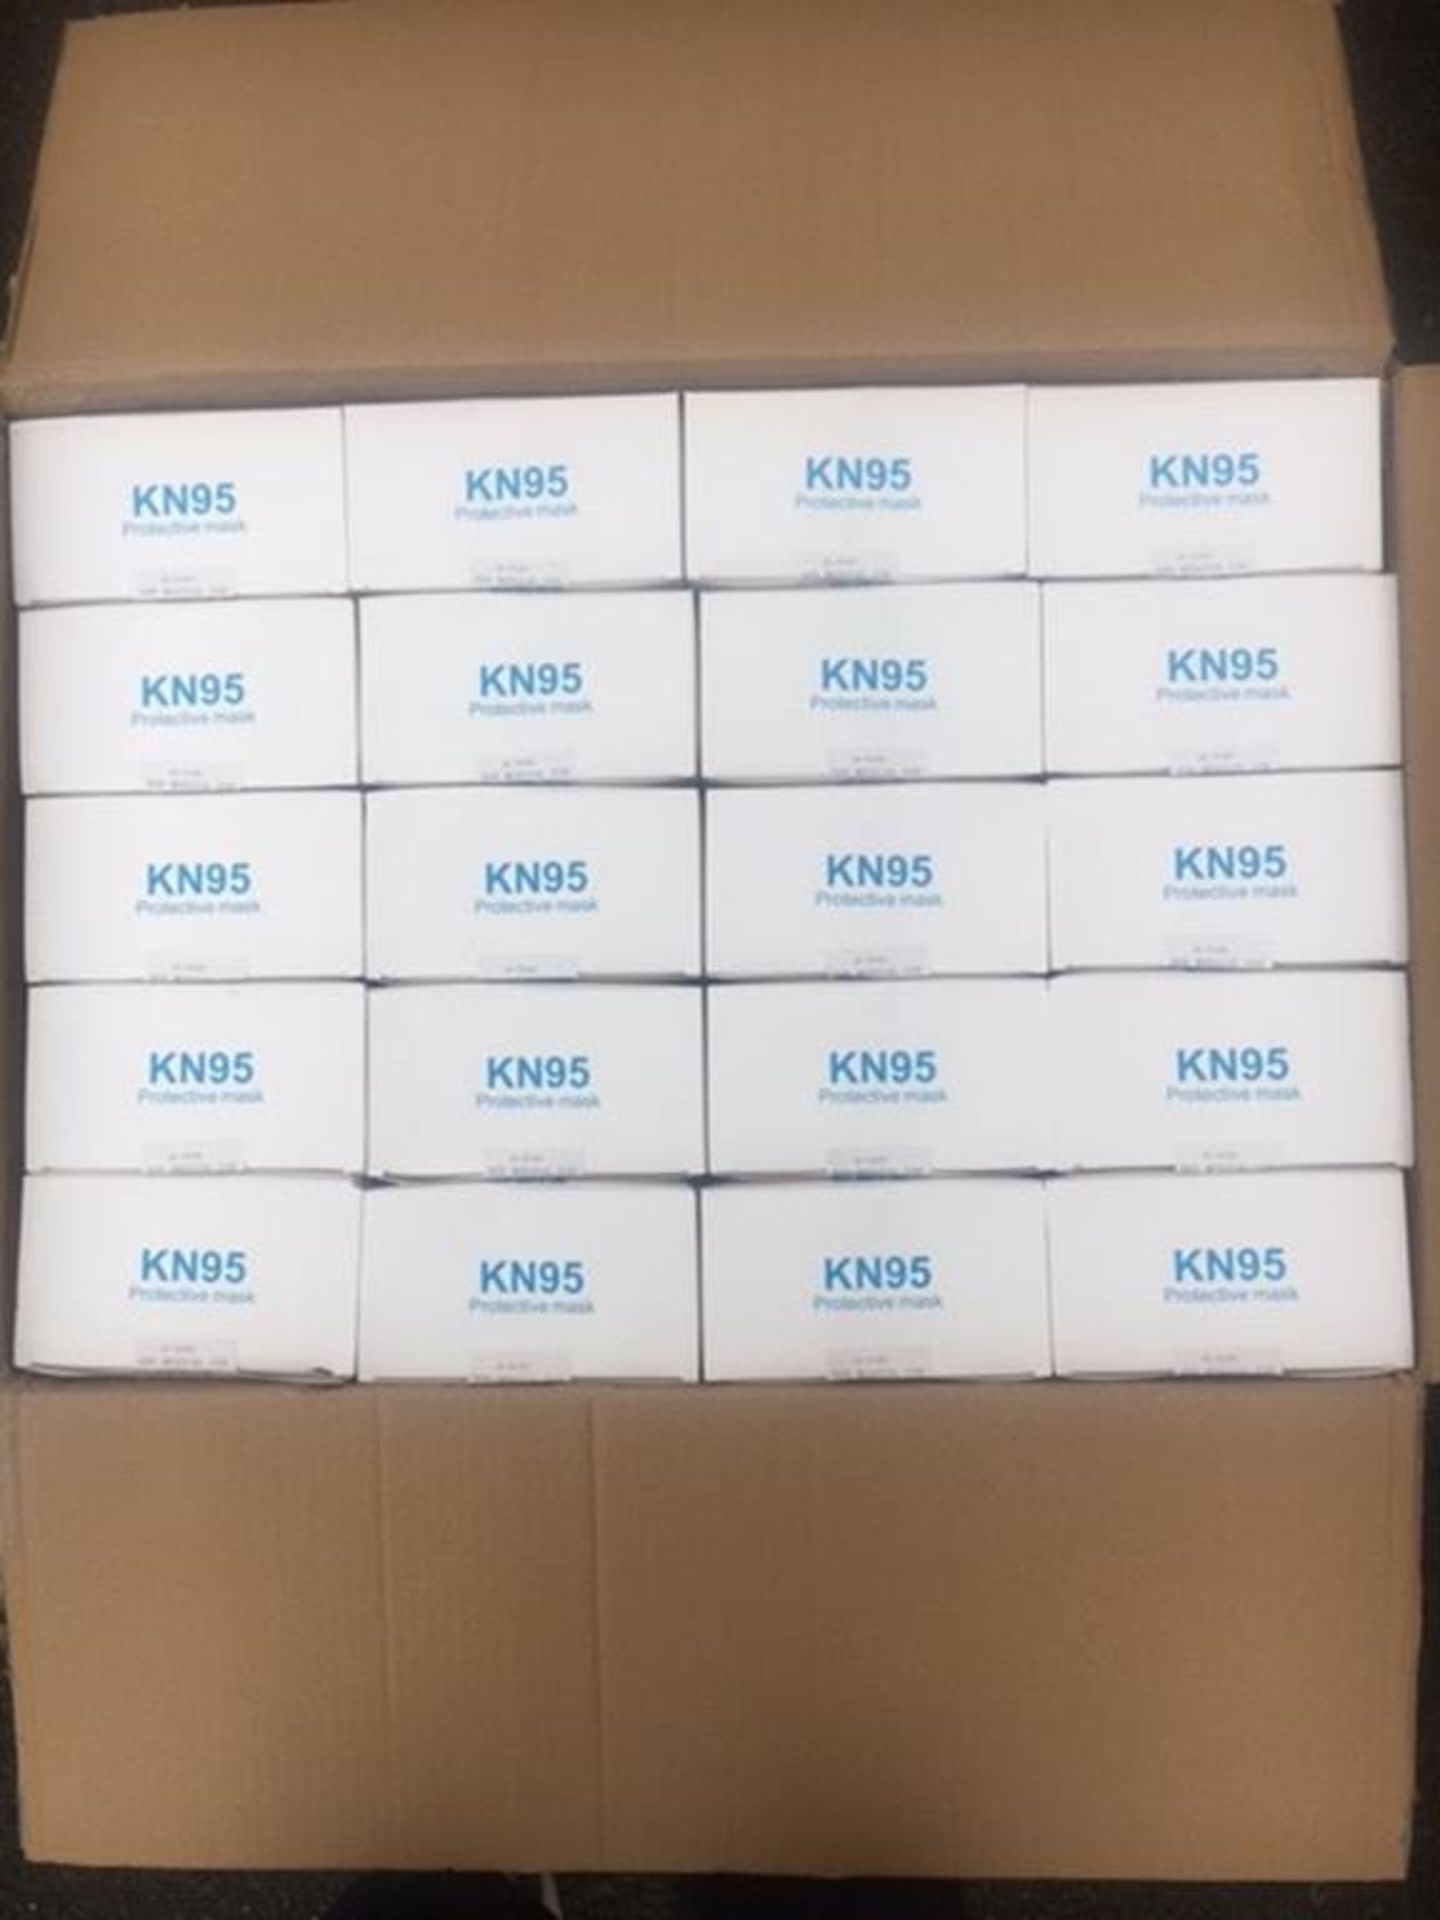 3600 Type KN95 Disposable Face Masks - Image 4 of 11